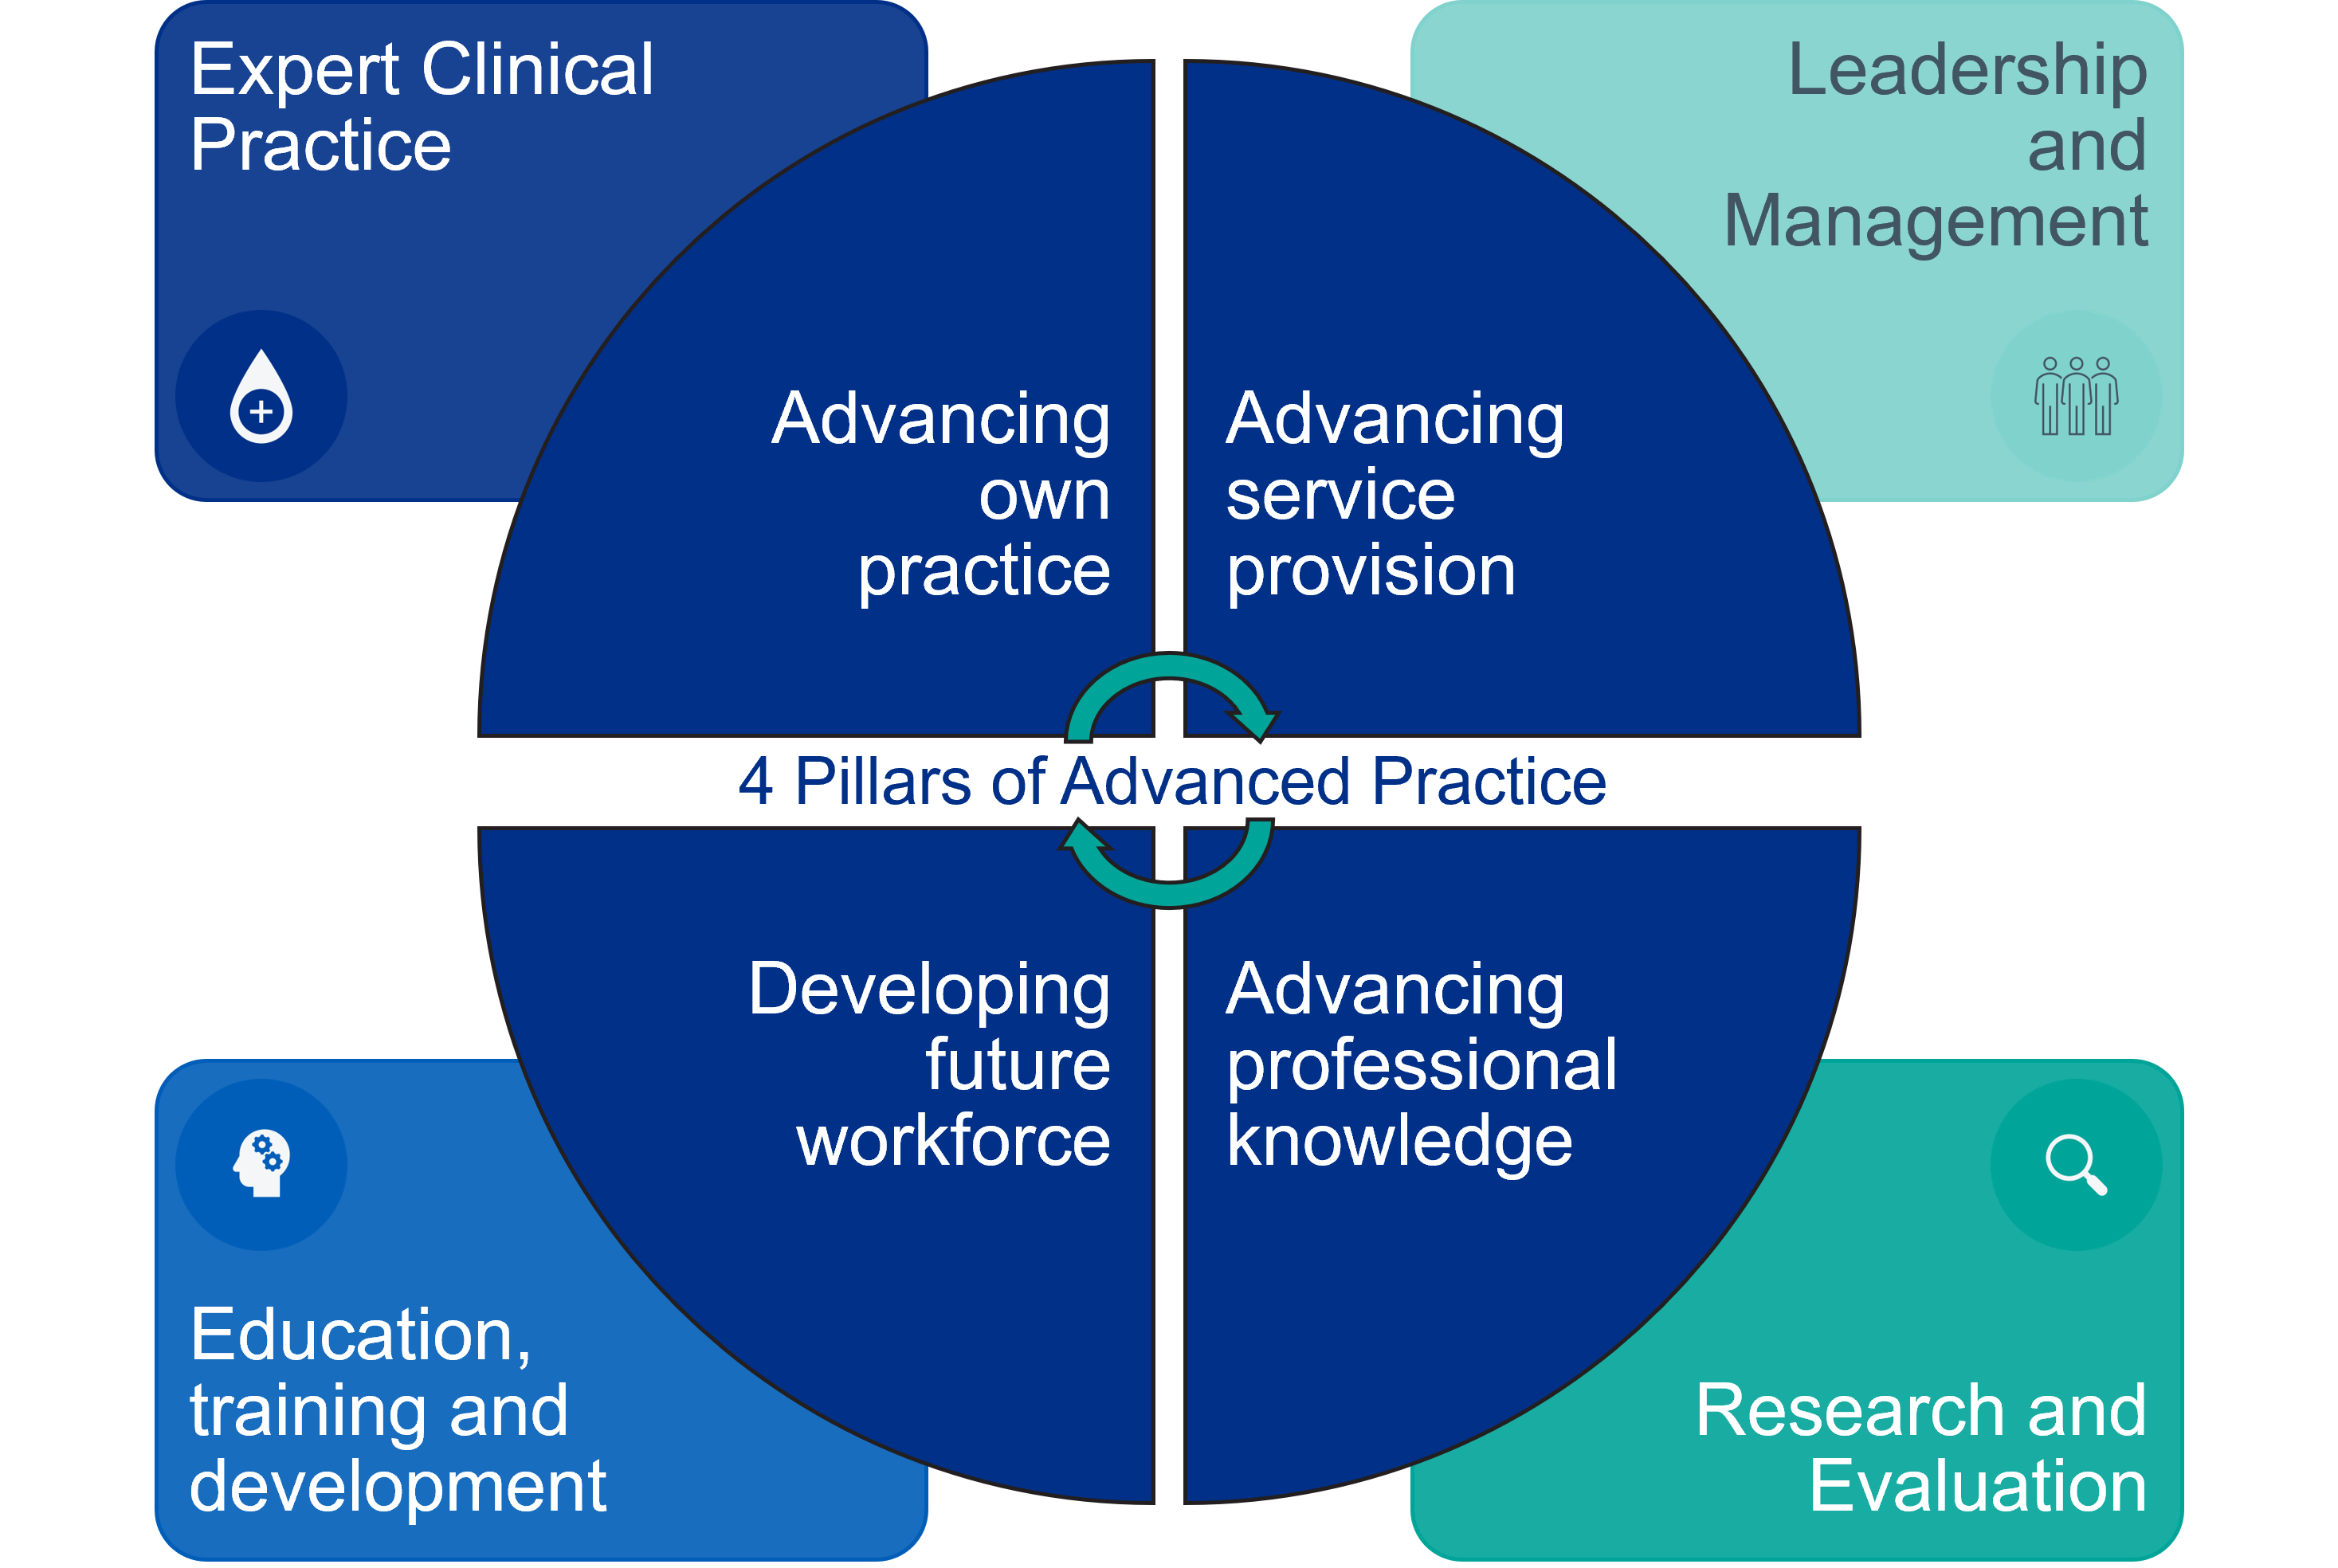 Midwifery Implementation 4 pillars of advanced practice 
Expert Clinical Practice - Advancing own practice

Leadership and Management - Advancing service provision

Education, training and development - Developing future workforce

Research and Evaluation - Advancing professional knowledge





